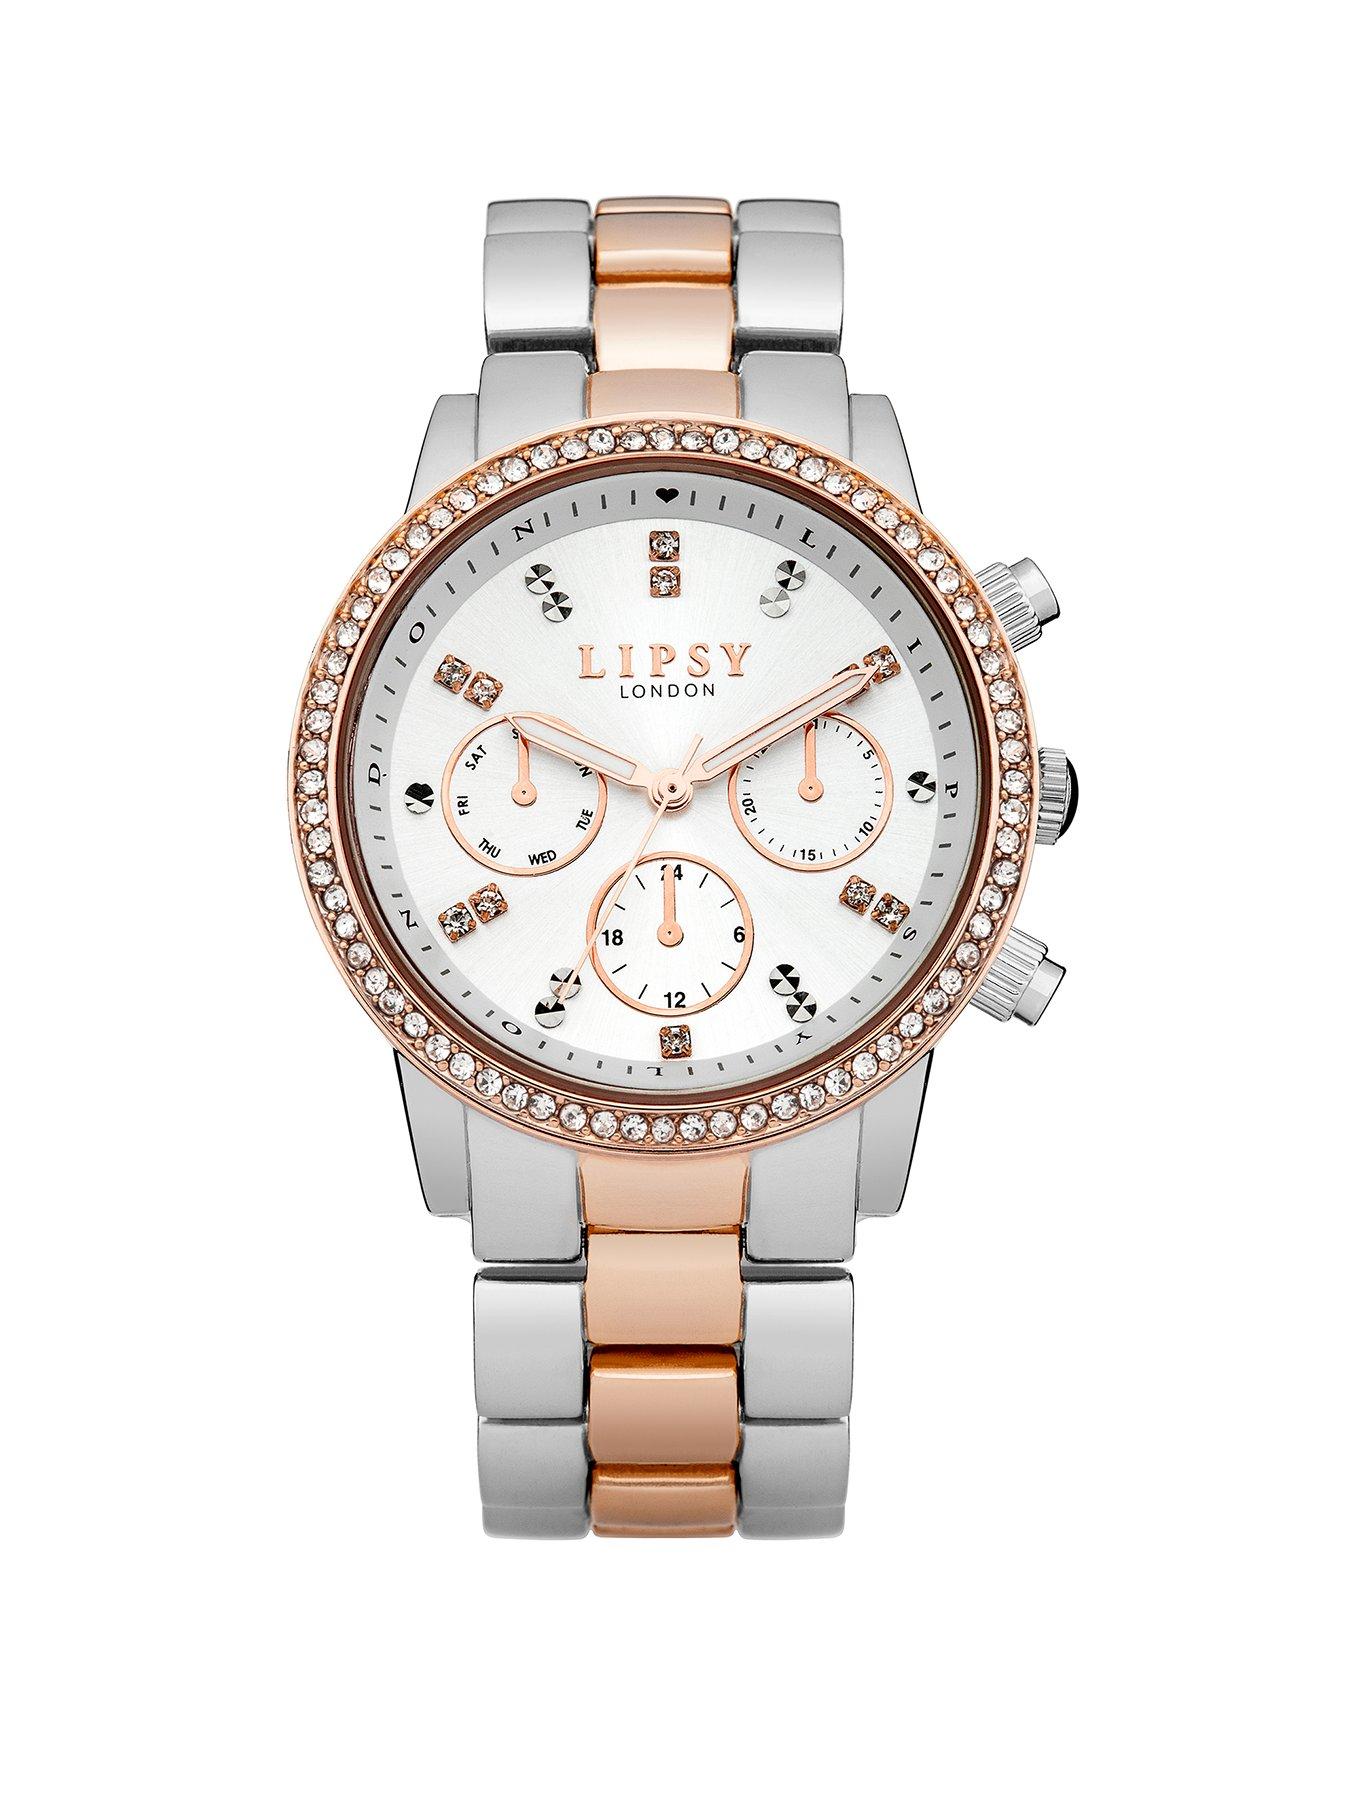  Lipsy London Womens Watch with Rose Gold Dial and Blush Pink  Strap, 34mm Diameter Case in Branded Watch Box LP150-2 Year Warranty,  Pink/Beige, 34mm, Strap : Babar: Clothing, Shoes & Jewelry